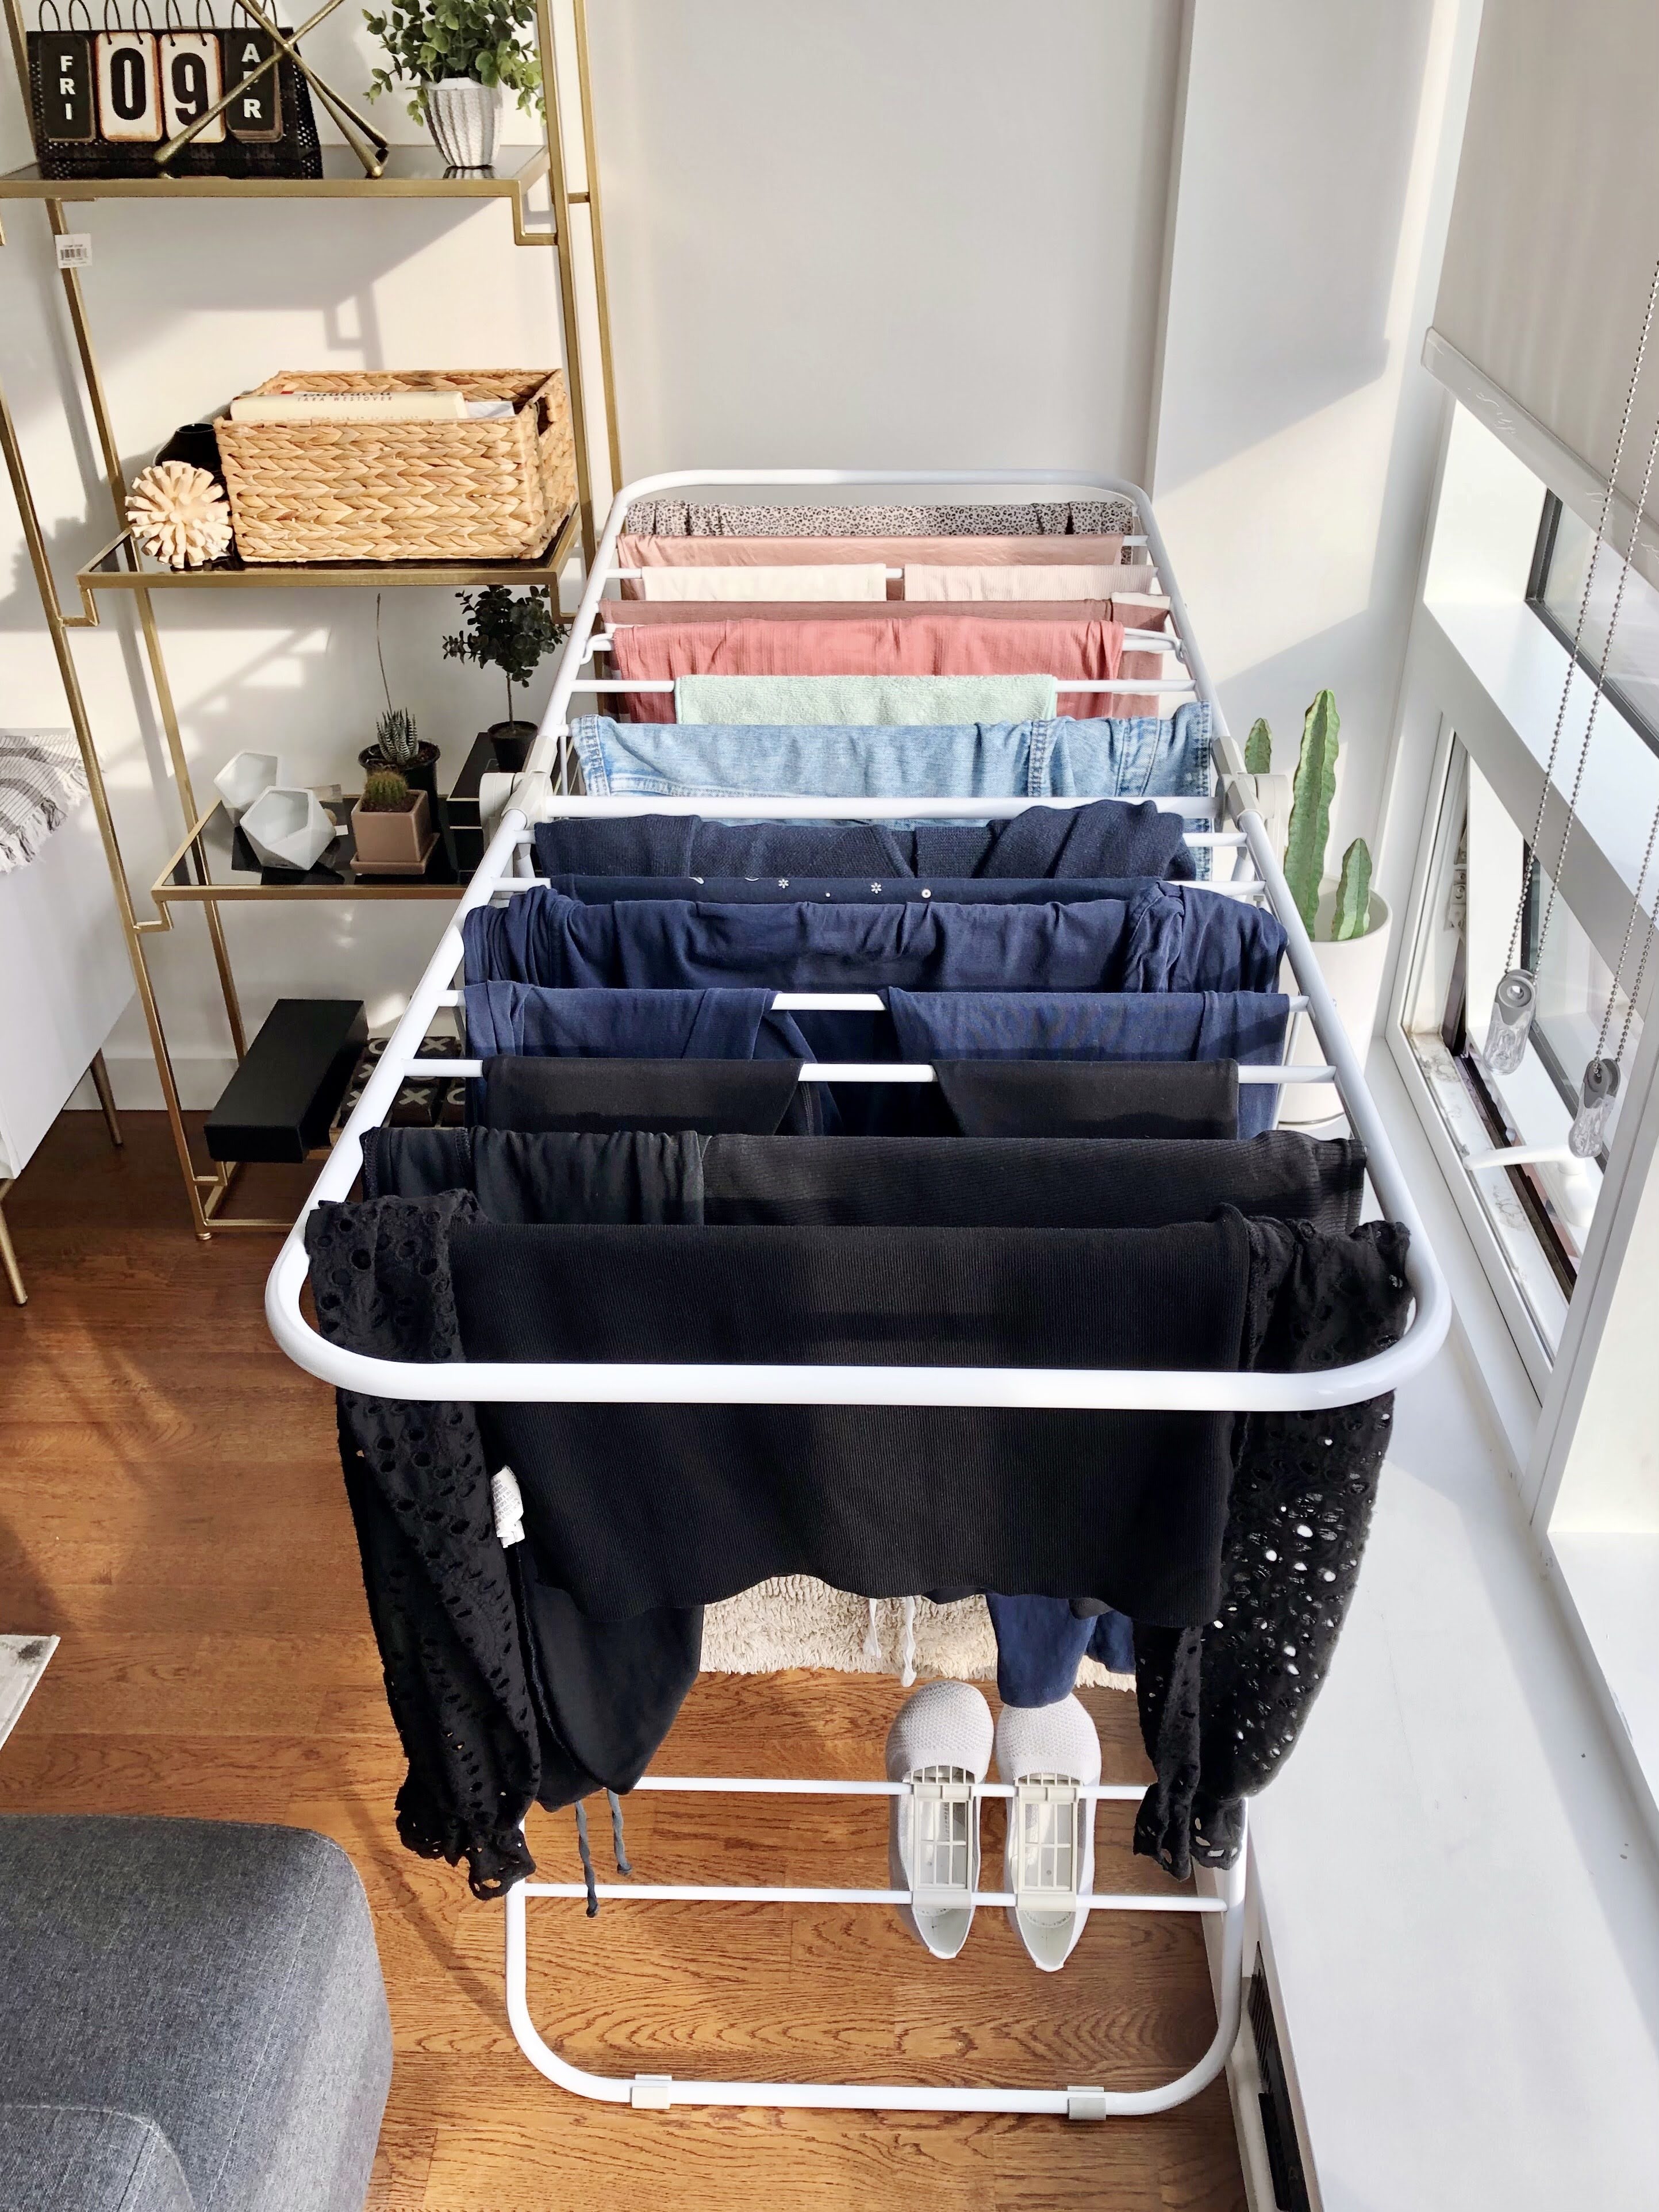 What's the best and cheapest way to dry clothes indoors - Which?